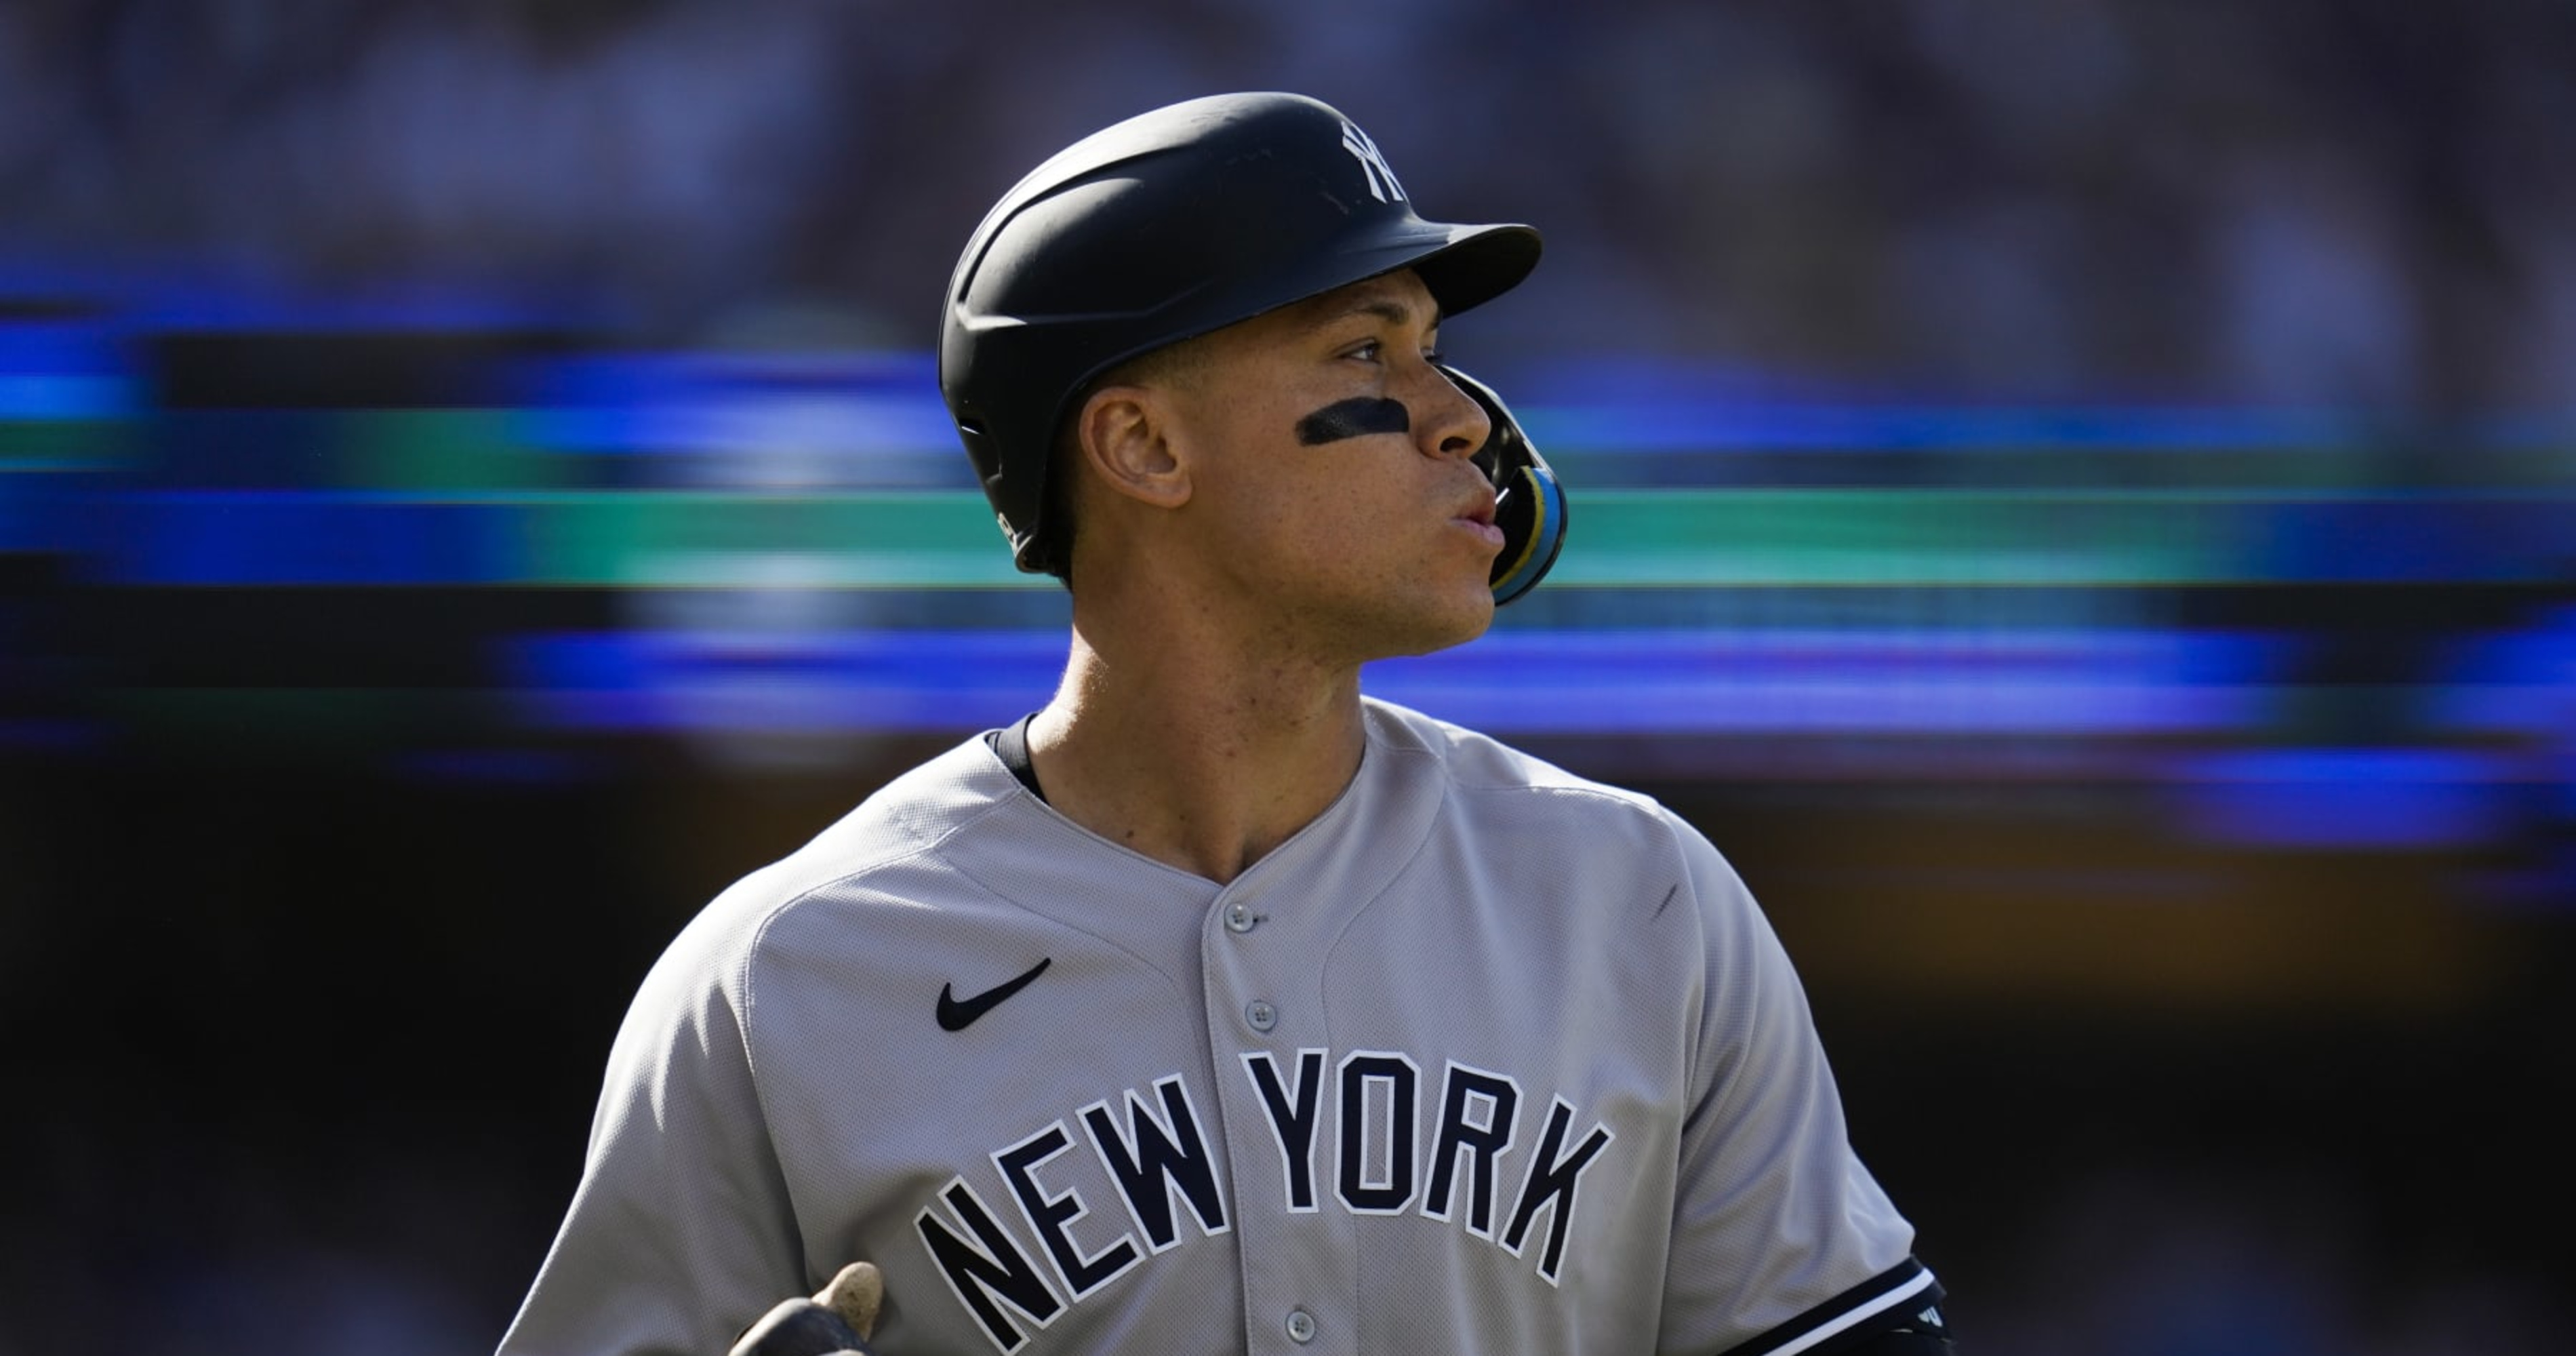 Yankees: Aaron Judge has torn toe ligament, no timetable to return